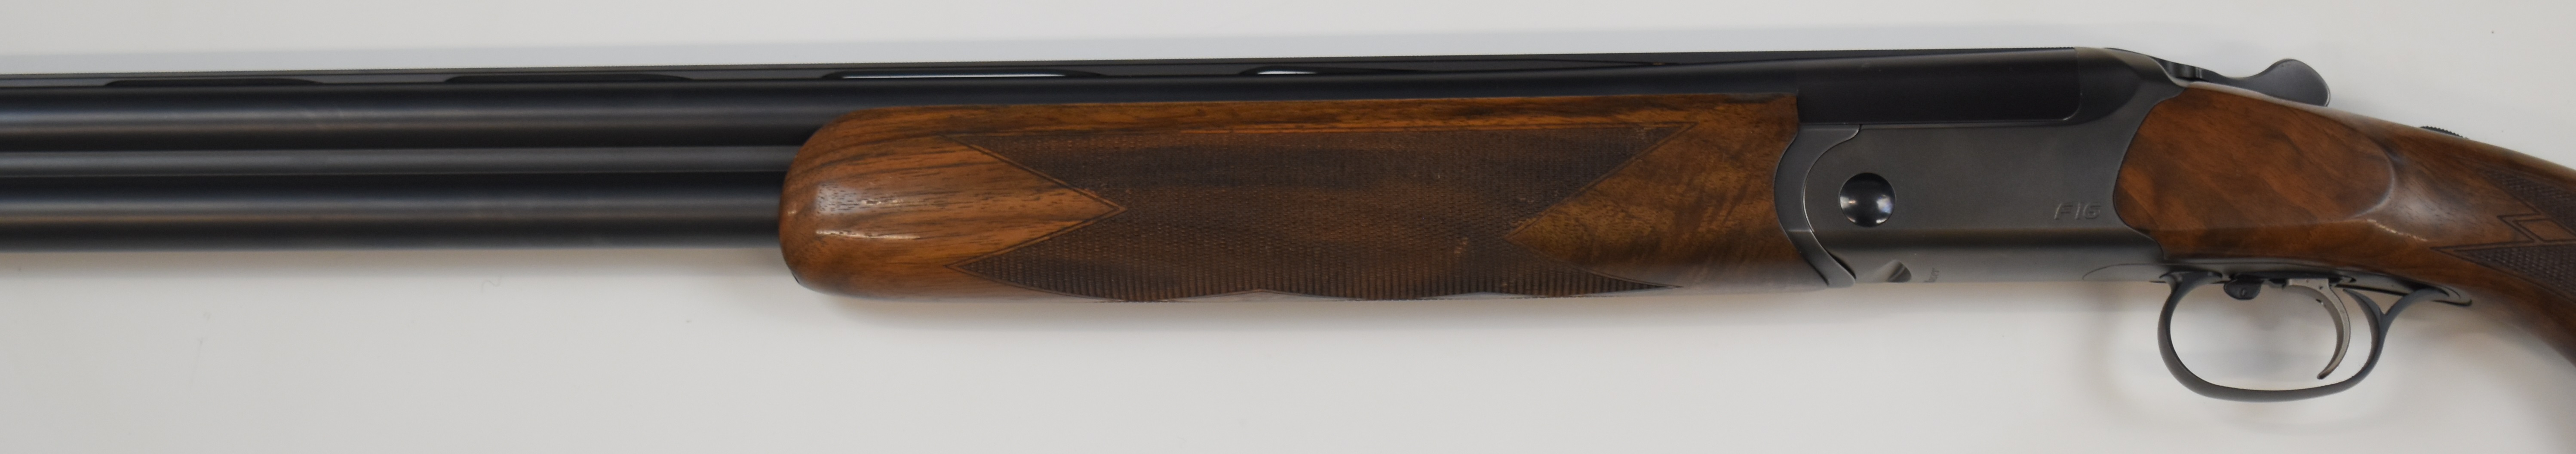 Blaser F16 12 bore over under ejector shotgun with named locks and underside, chequered semi- - Image 20 of 22